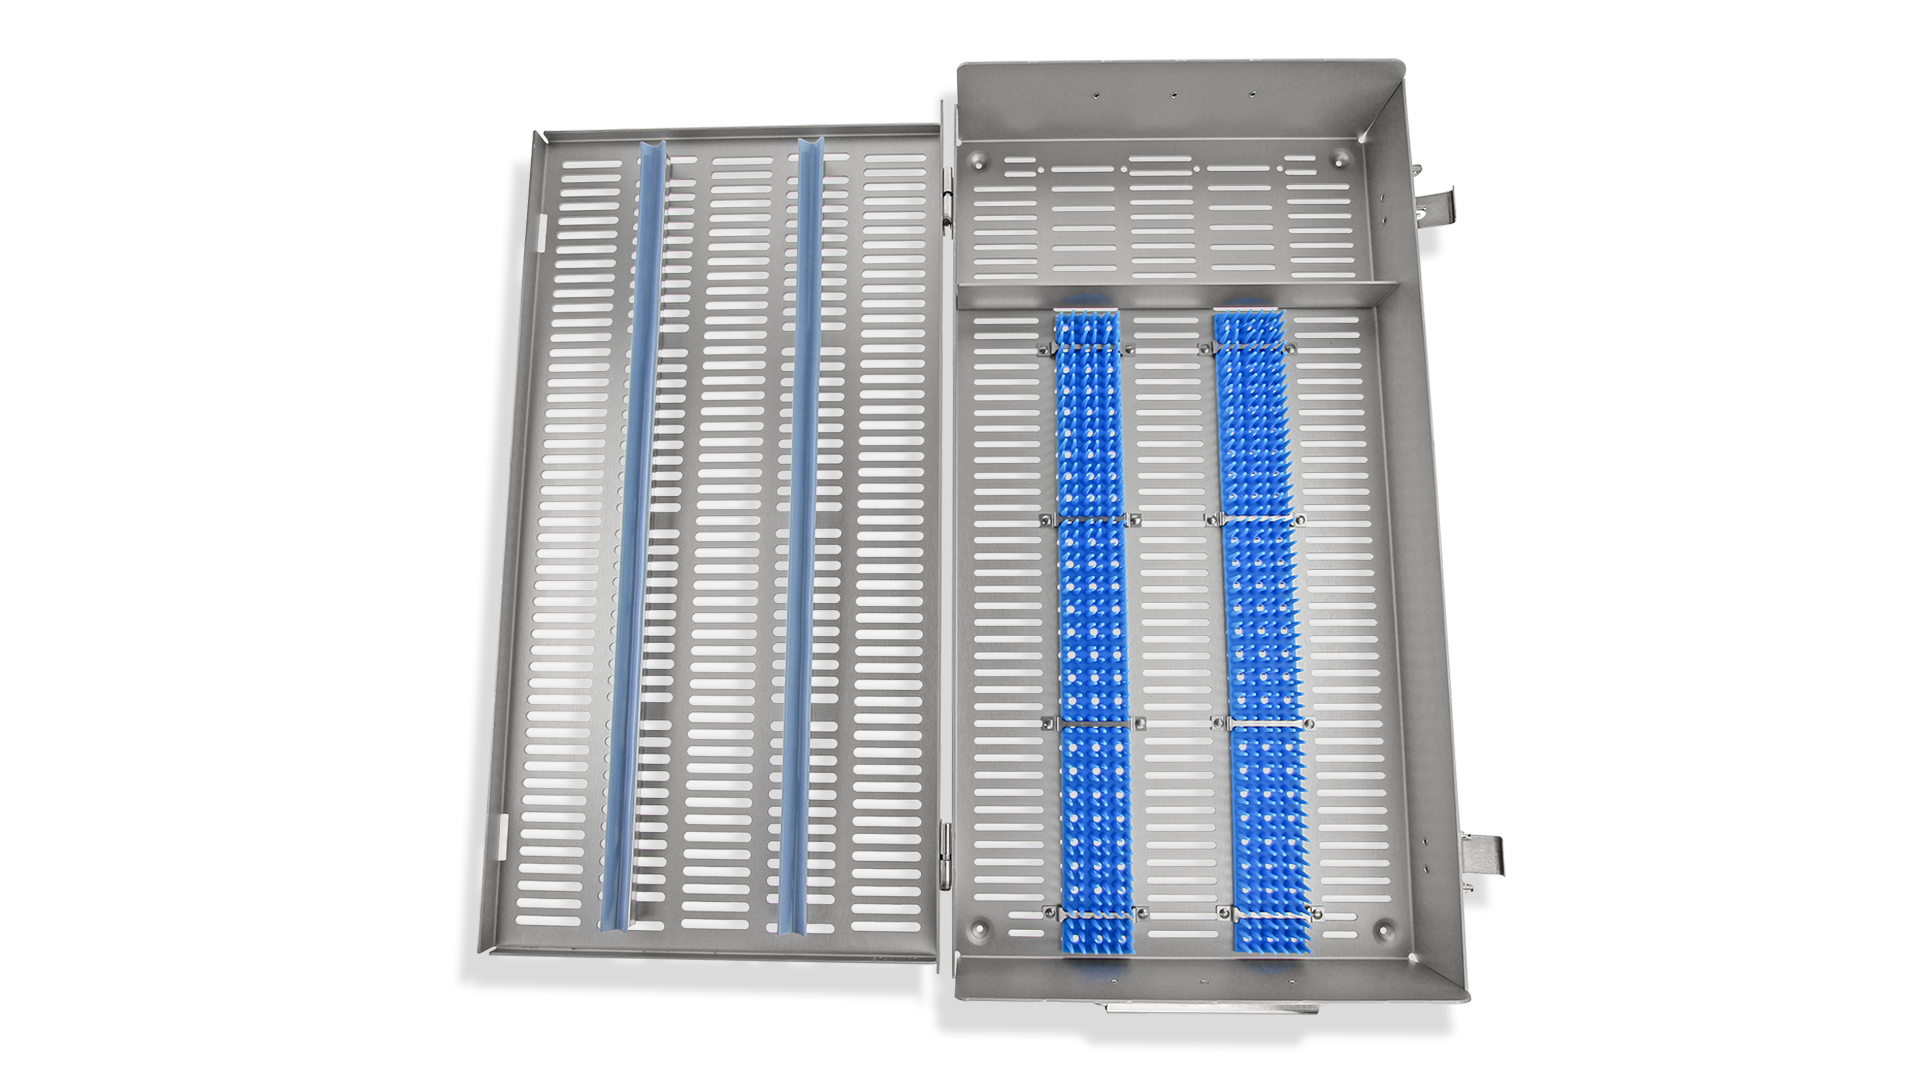 Wexler Metal Sterilization Tray - Double level w/Pin mat and retainers